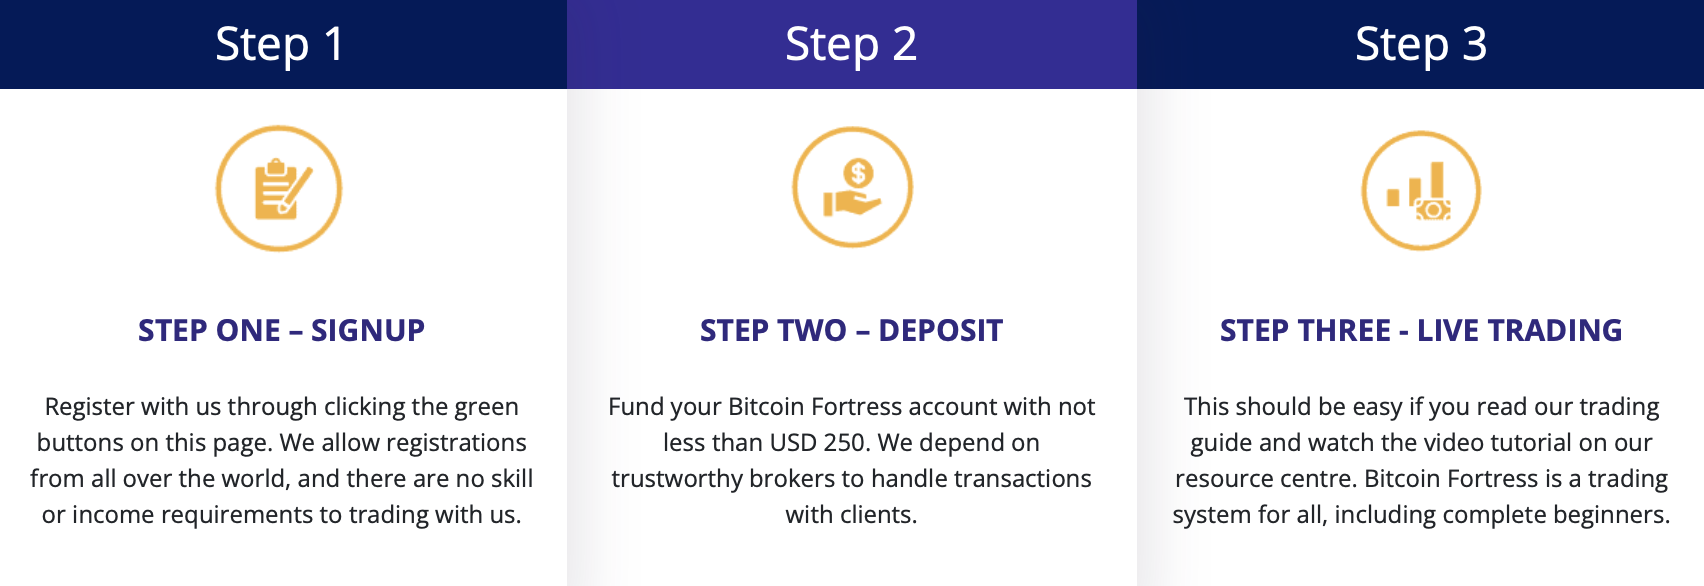 Three steps of trading on Bitcoin Fortress